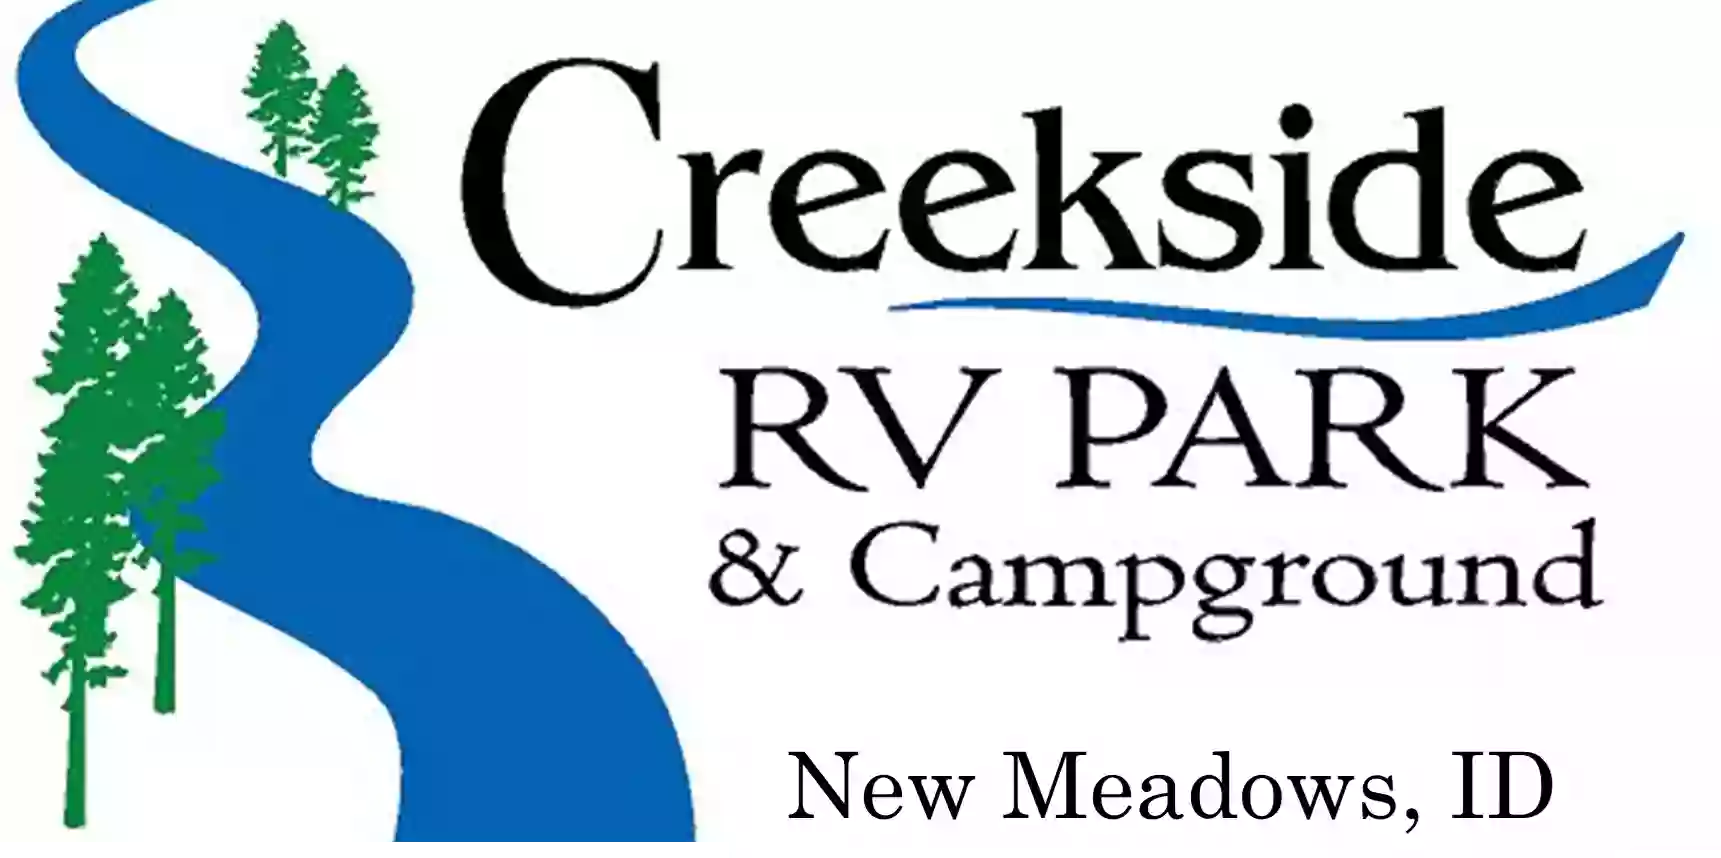 Creekside RV Park and Campground